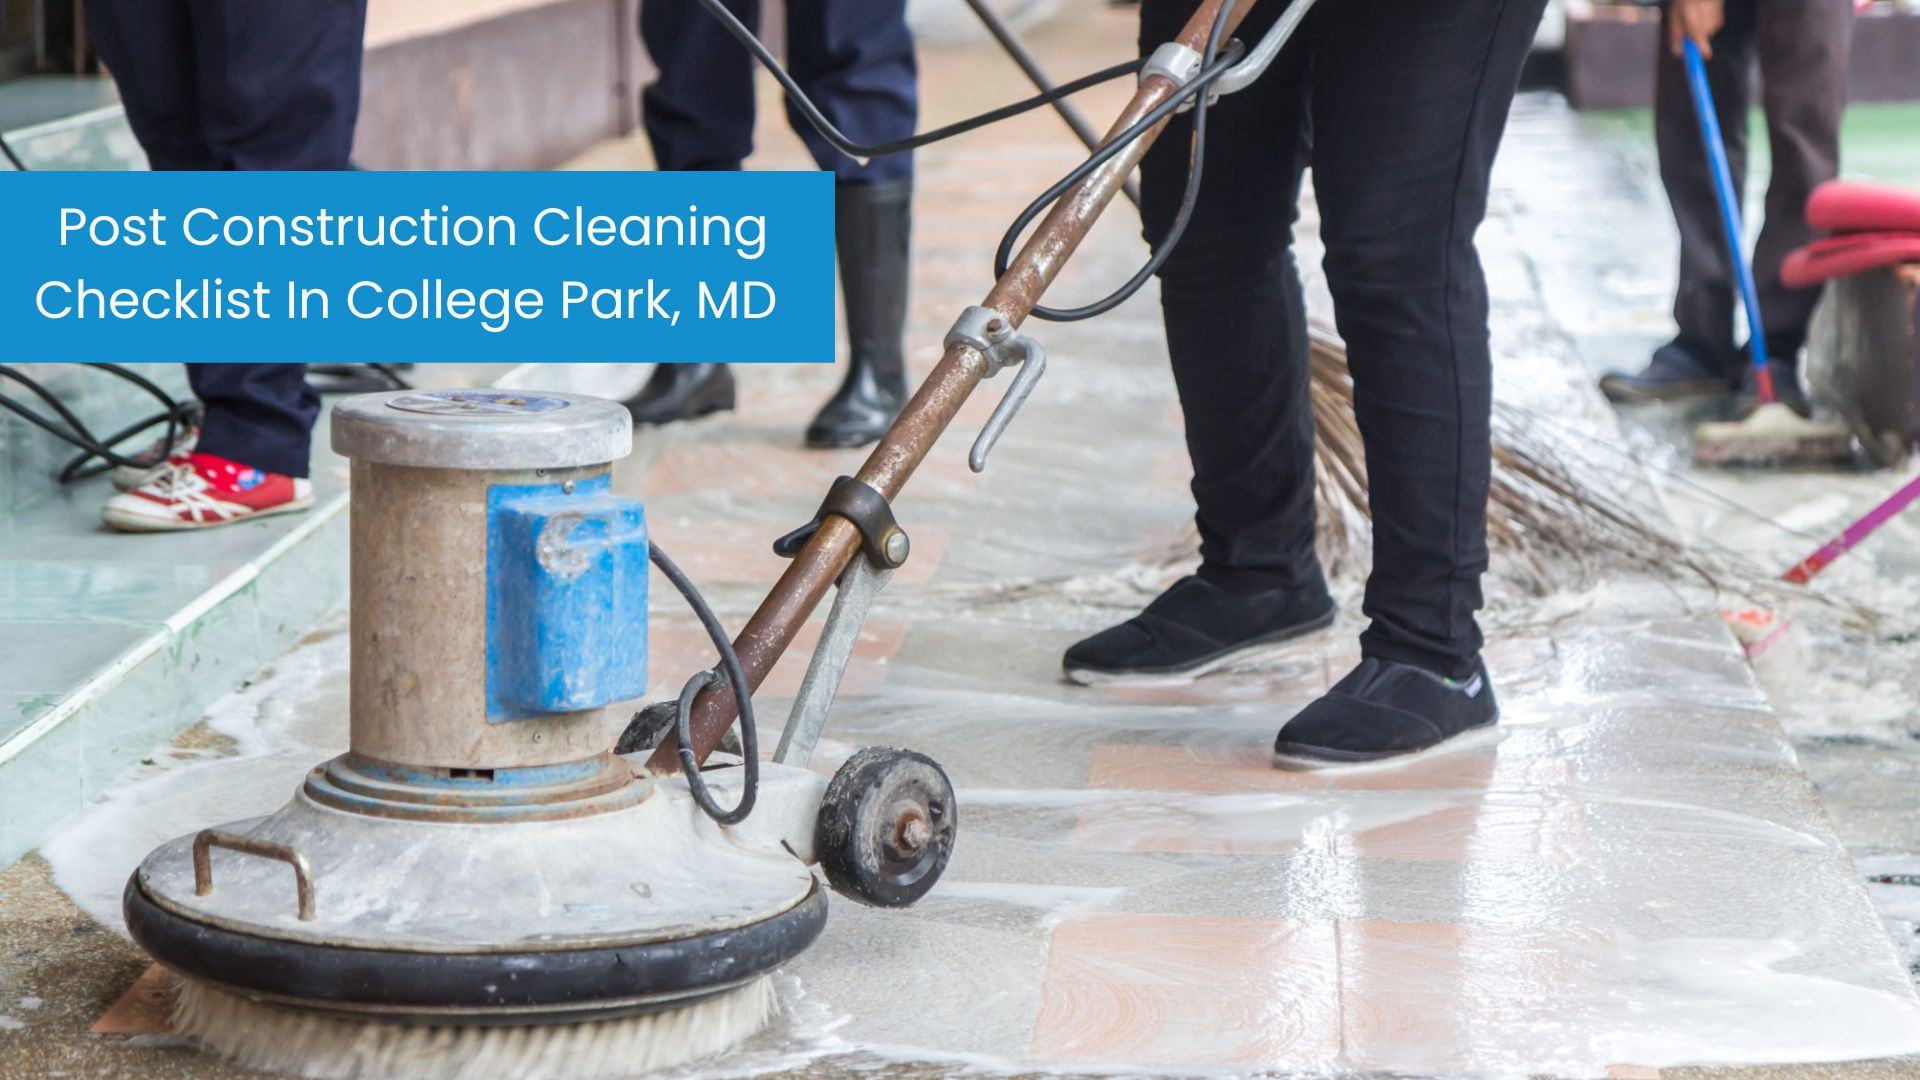 Top 4 Post Construction Cleaning Checklist in College Park